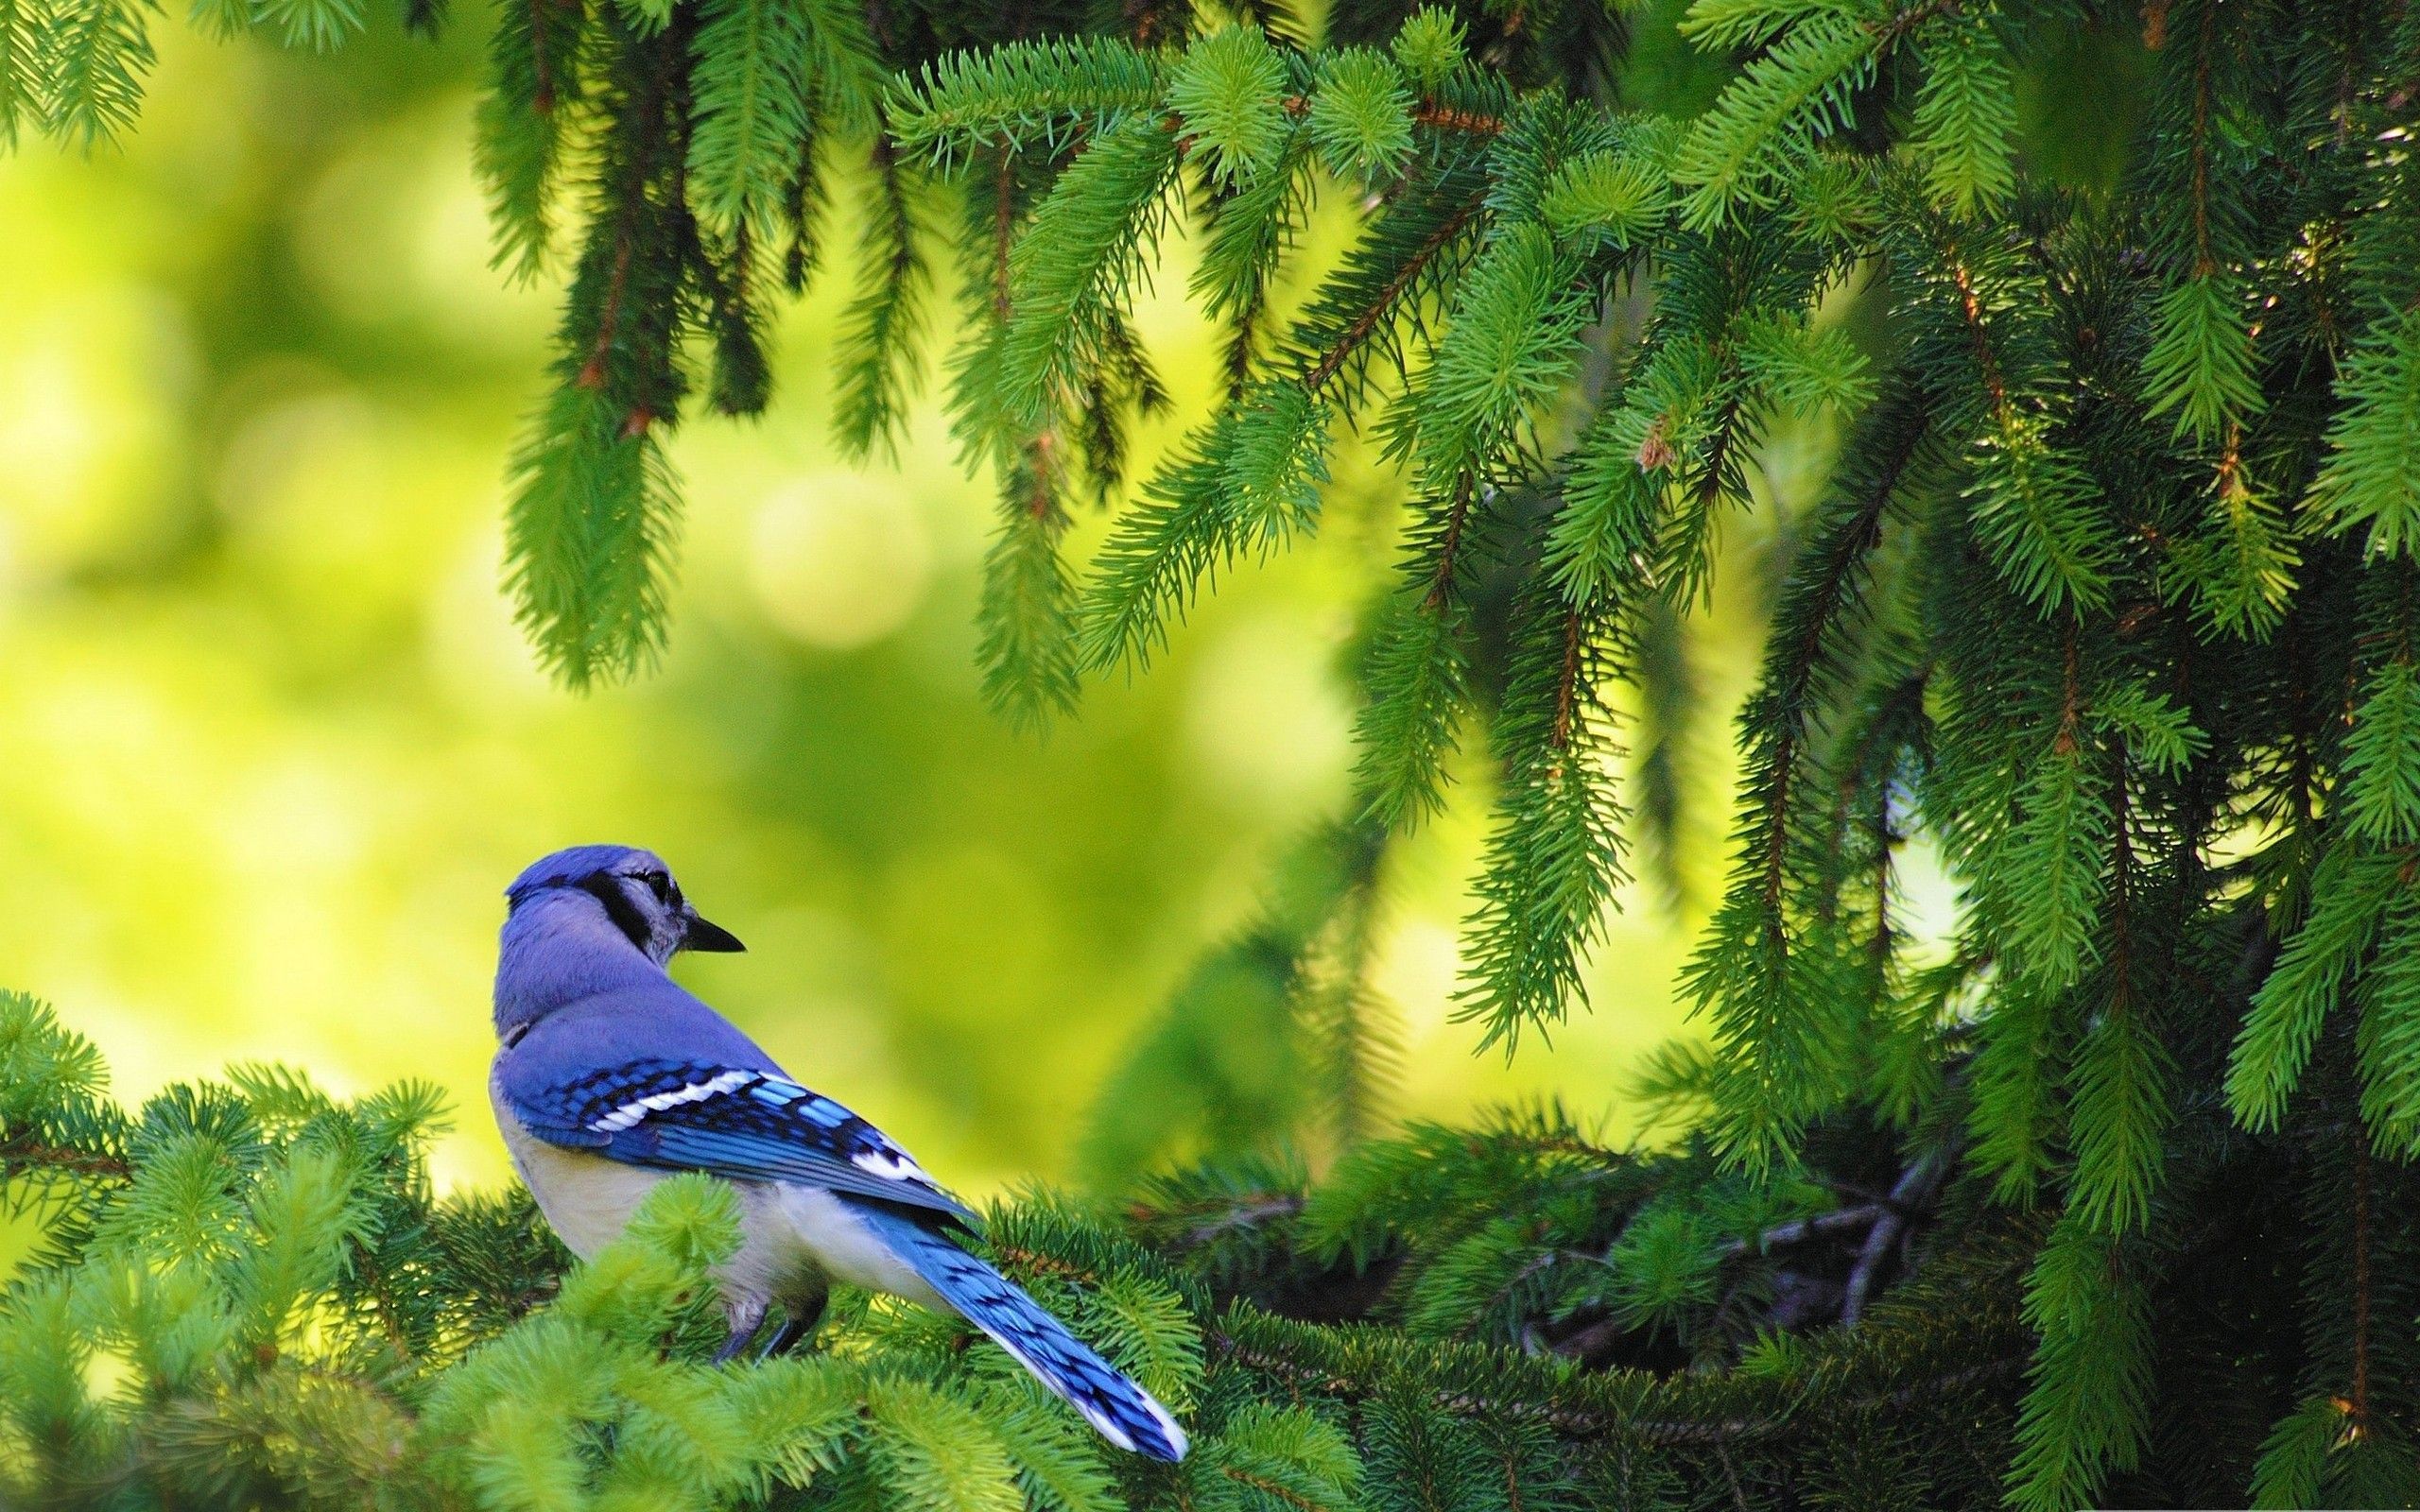 Natural Birds HD Wallpaper Download awesome, Nice and High Quality